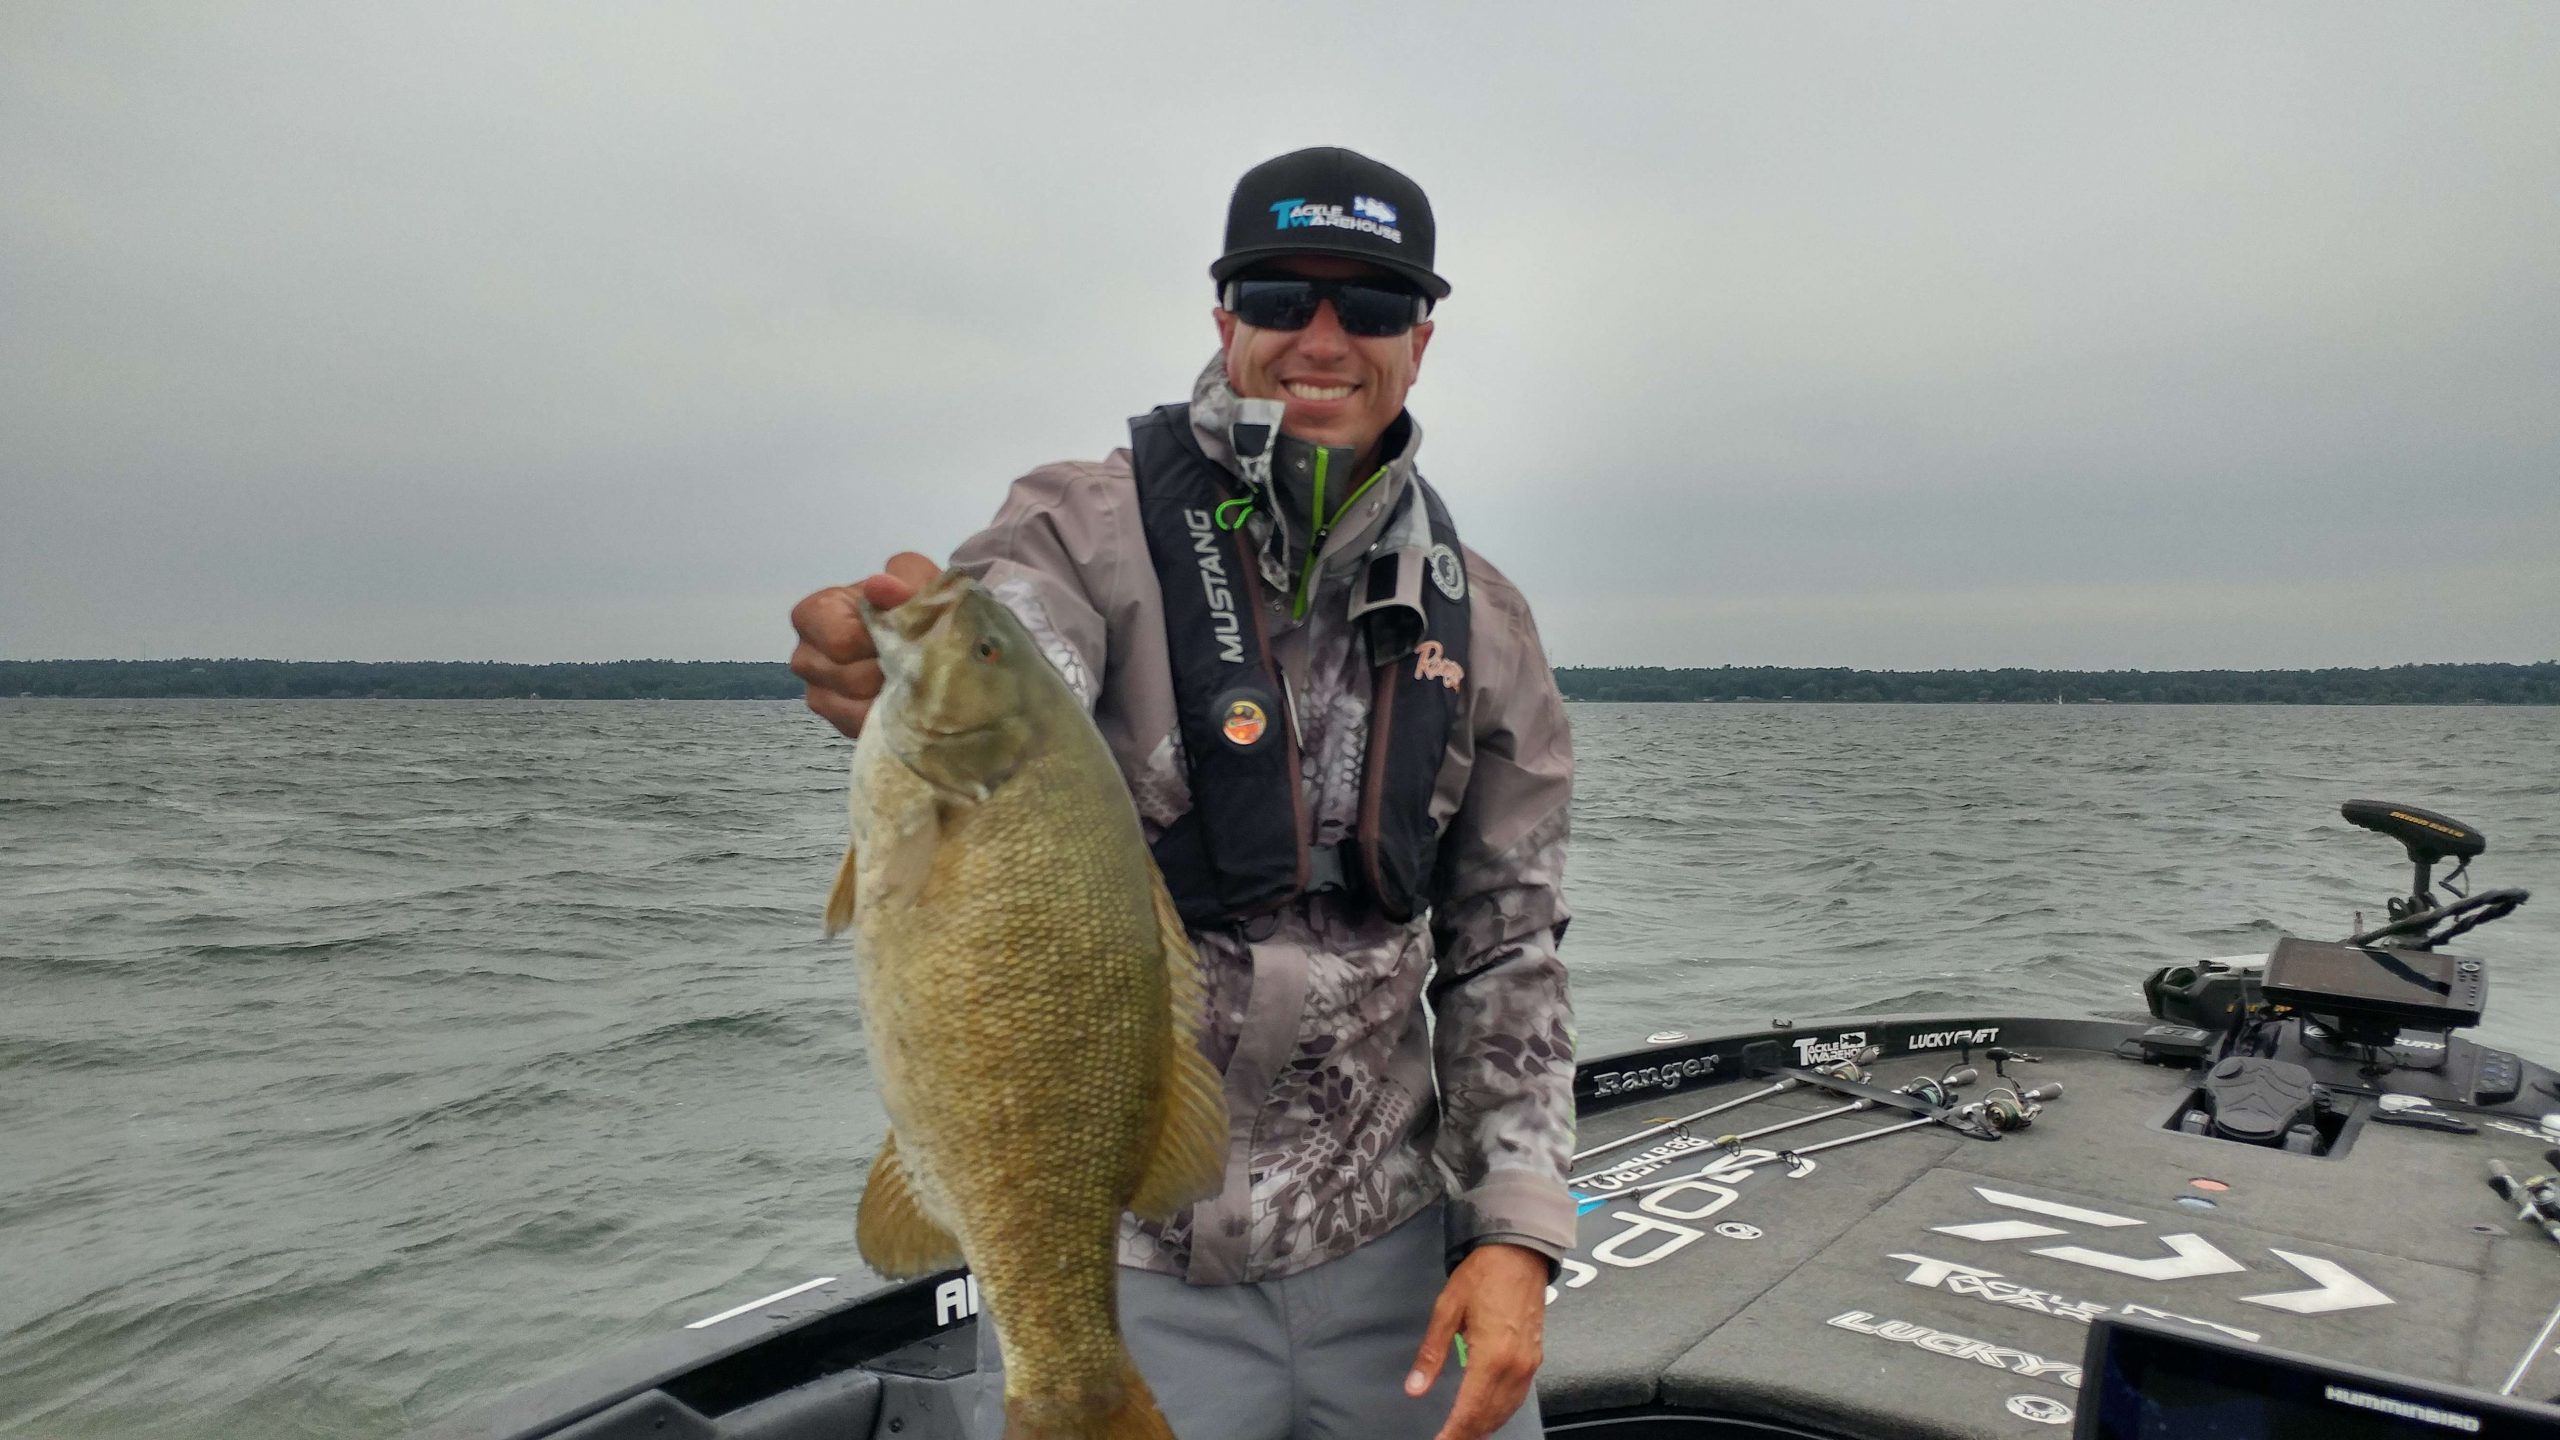 A beautiful Smallmouth! And another cull! Looking like he will have a good sack!